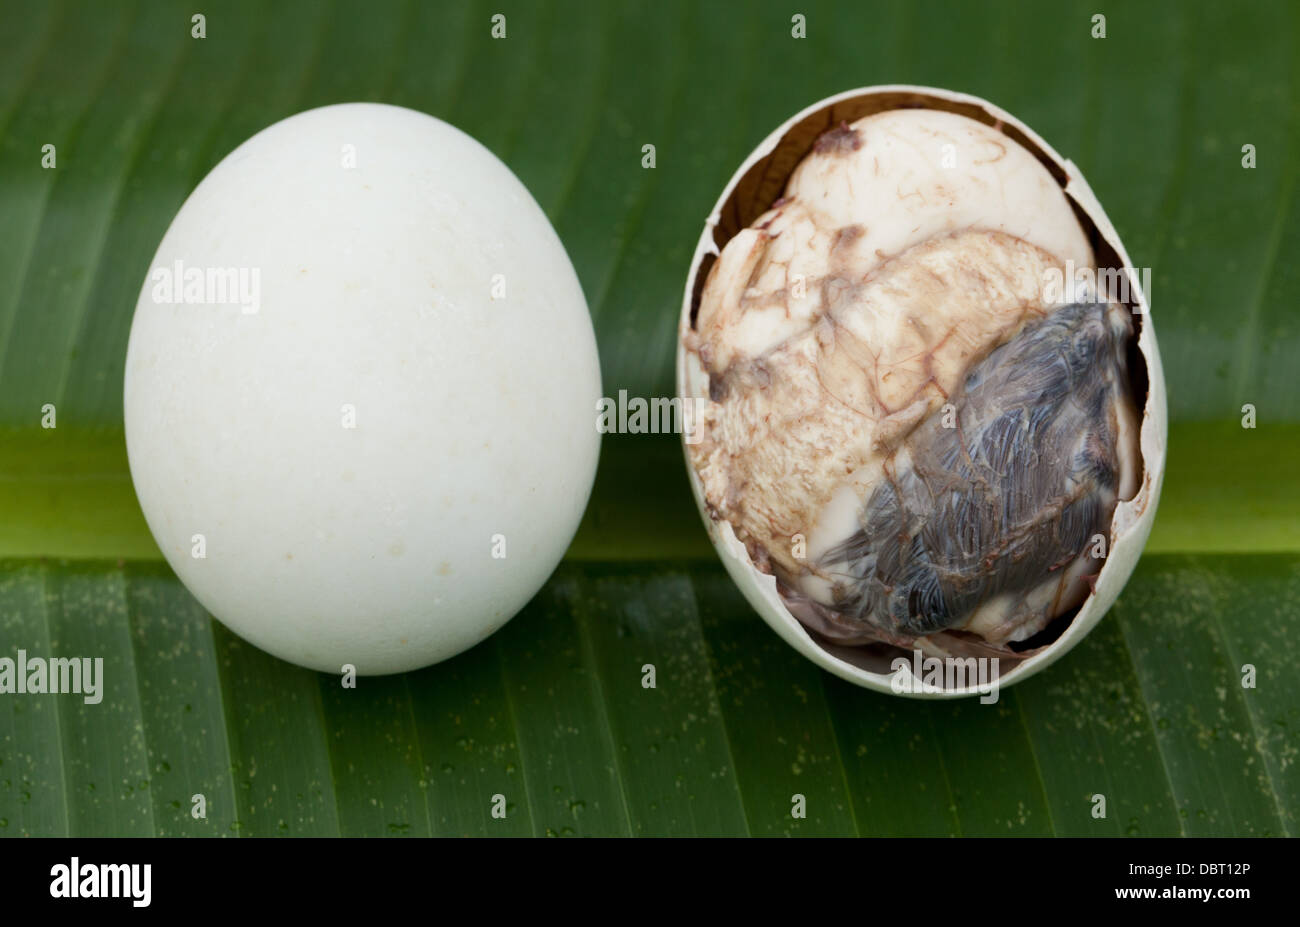 A partially open balut, or fertilized duck egg, pictured on banana leaf alongside a whole one in Oriental Mindoro, Philippines. Stock Photo